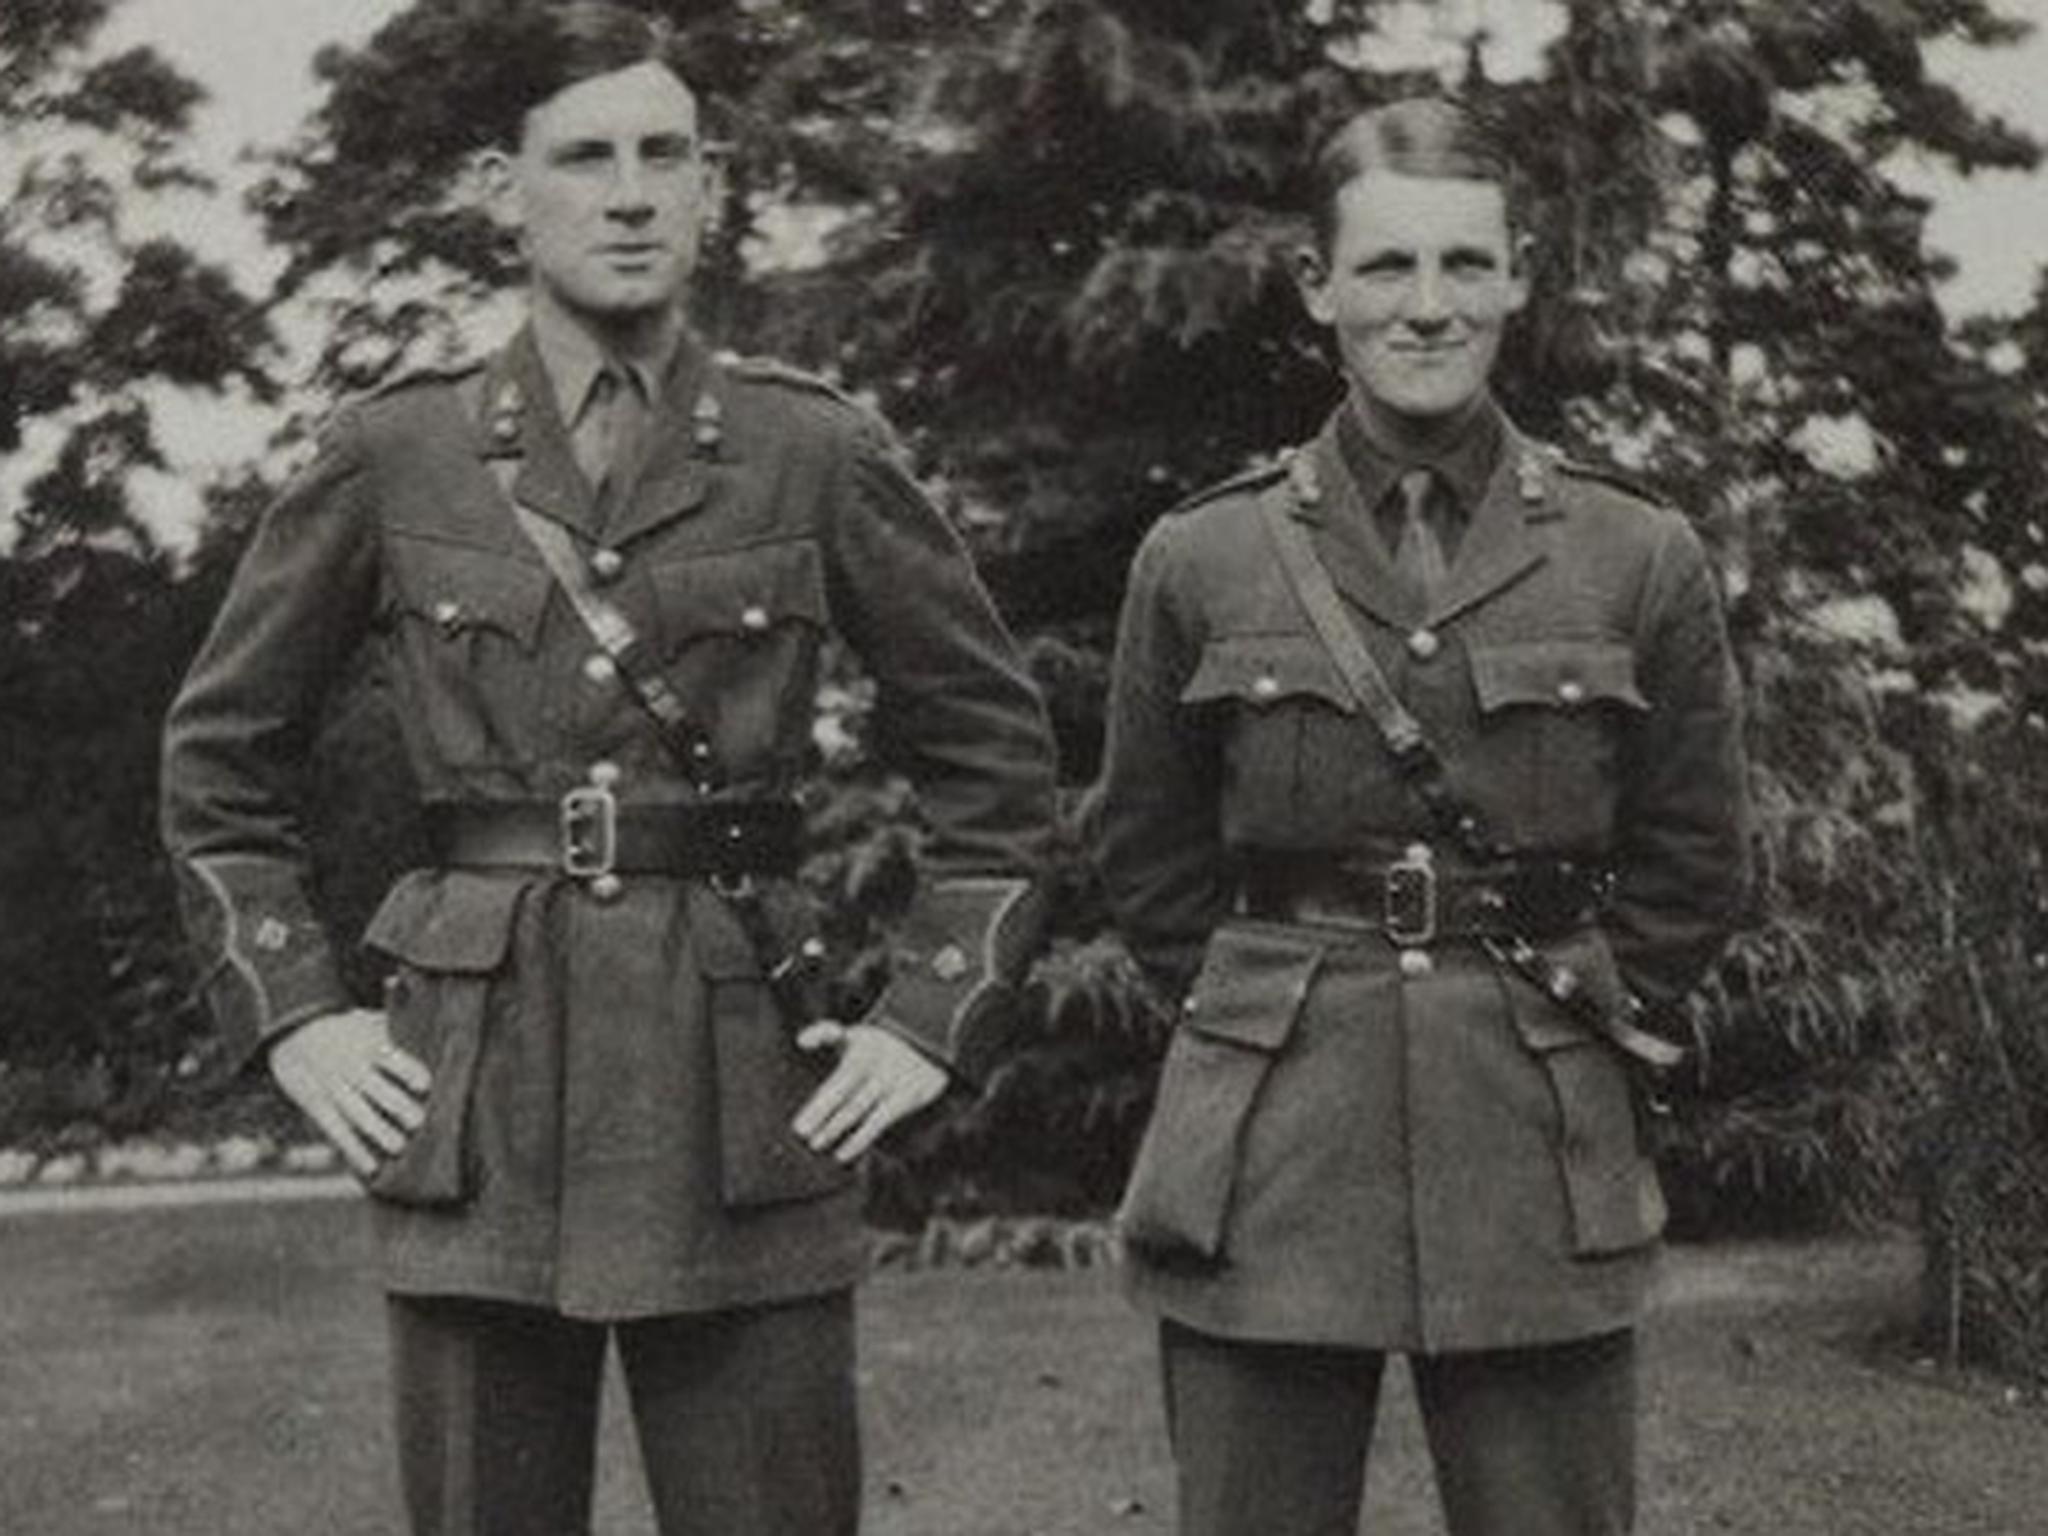 Siegfried Sassoon (left) wrote several poems about David Thomas